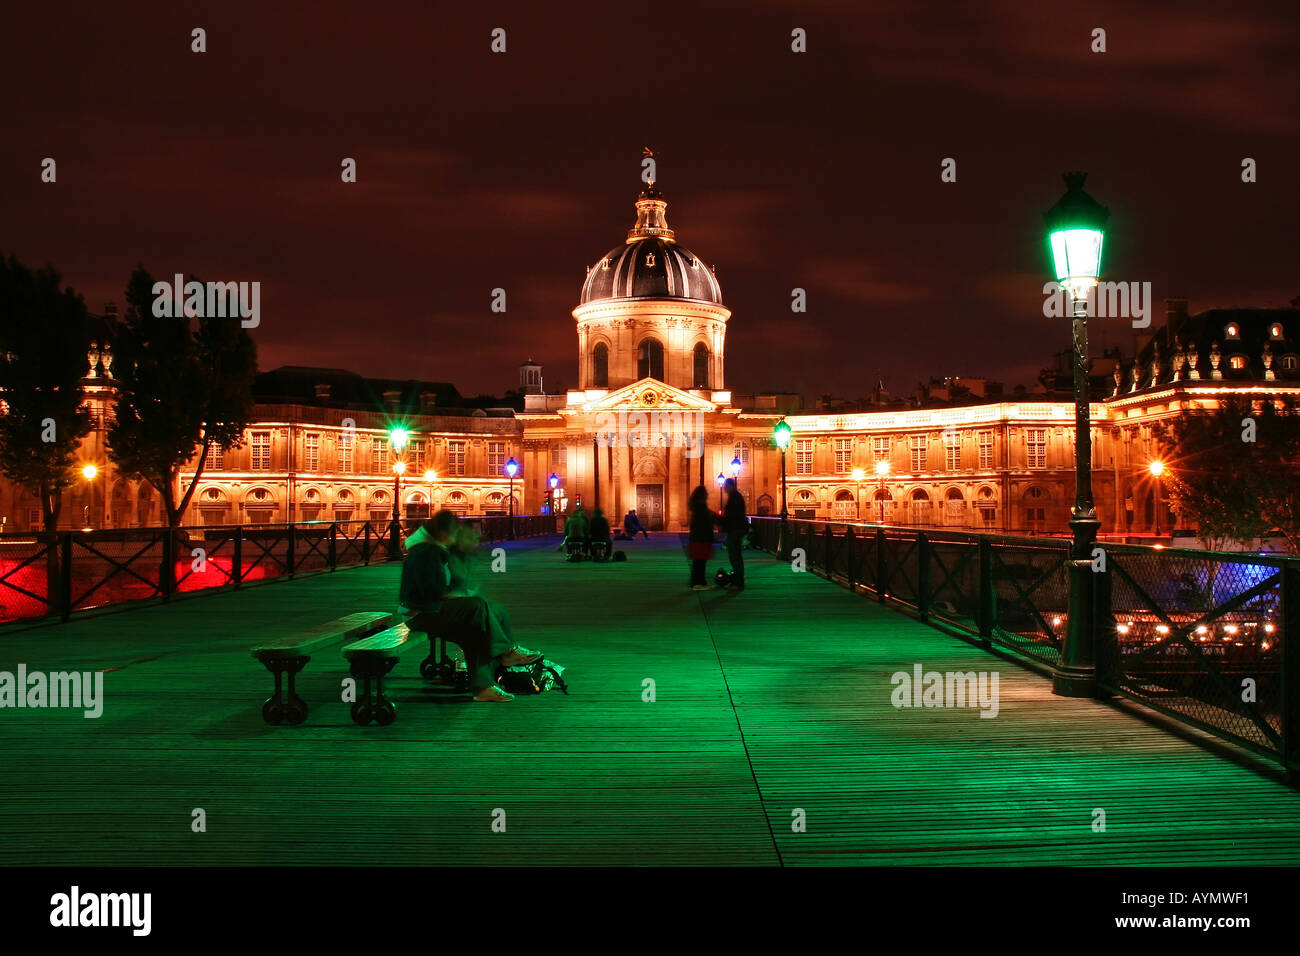 Le pont des Arts by night with the French Institute in the background - Paris, France Stock Photo